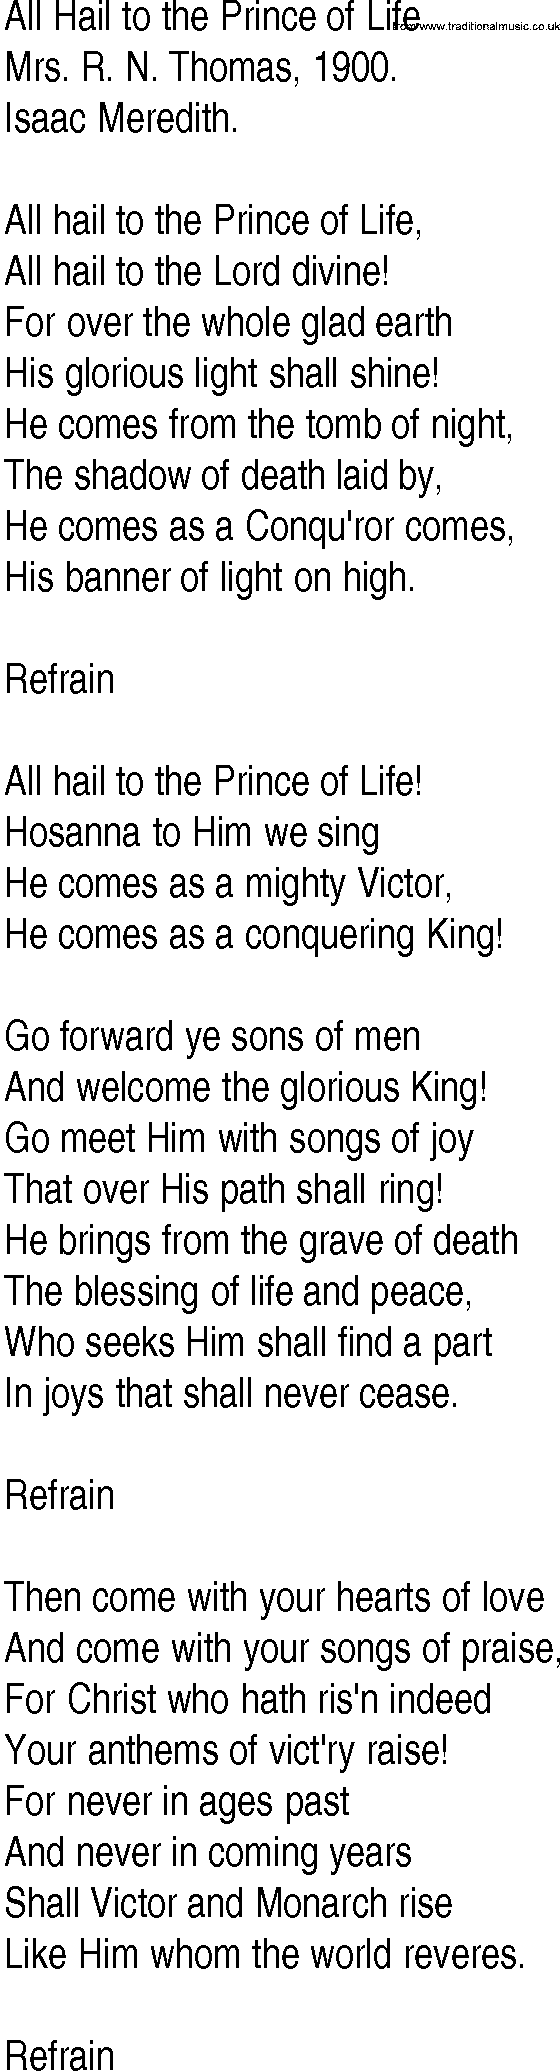 Hymn and Gospel Song: All Hail to the Prince of Life by Mrs R N Thomas lyrics